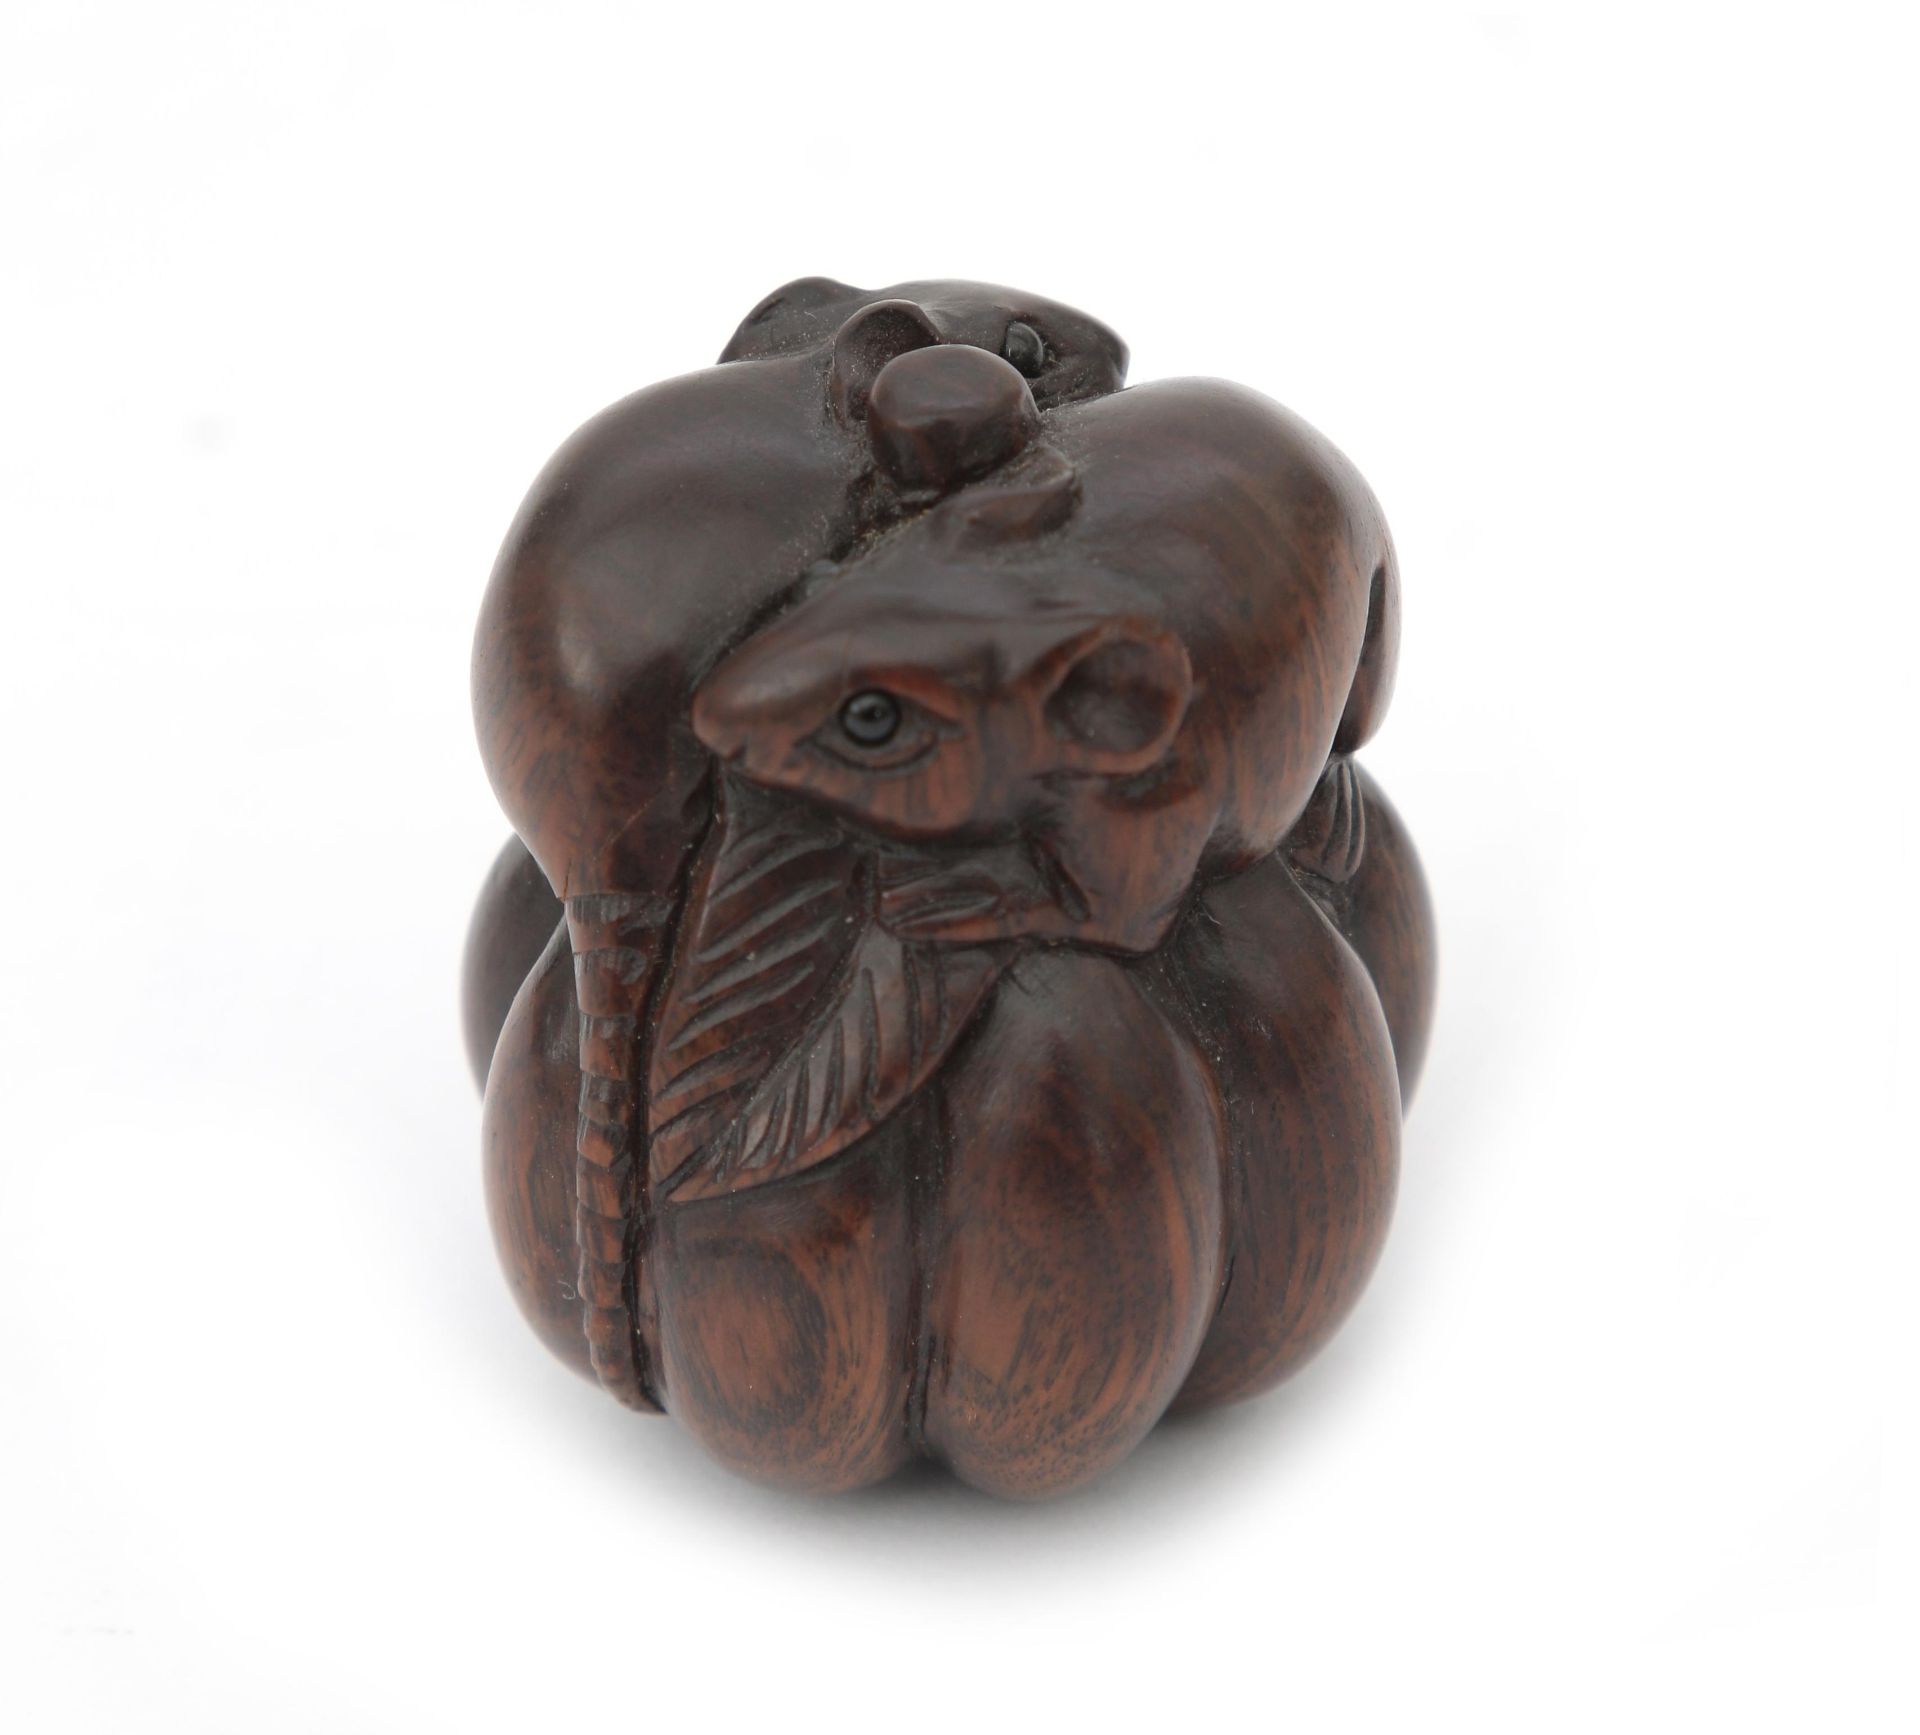 A carved wooden netsuke depicting two rats on a pumpkin, signed. 20th century